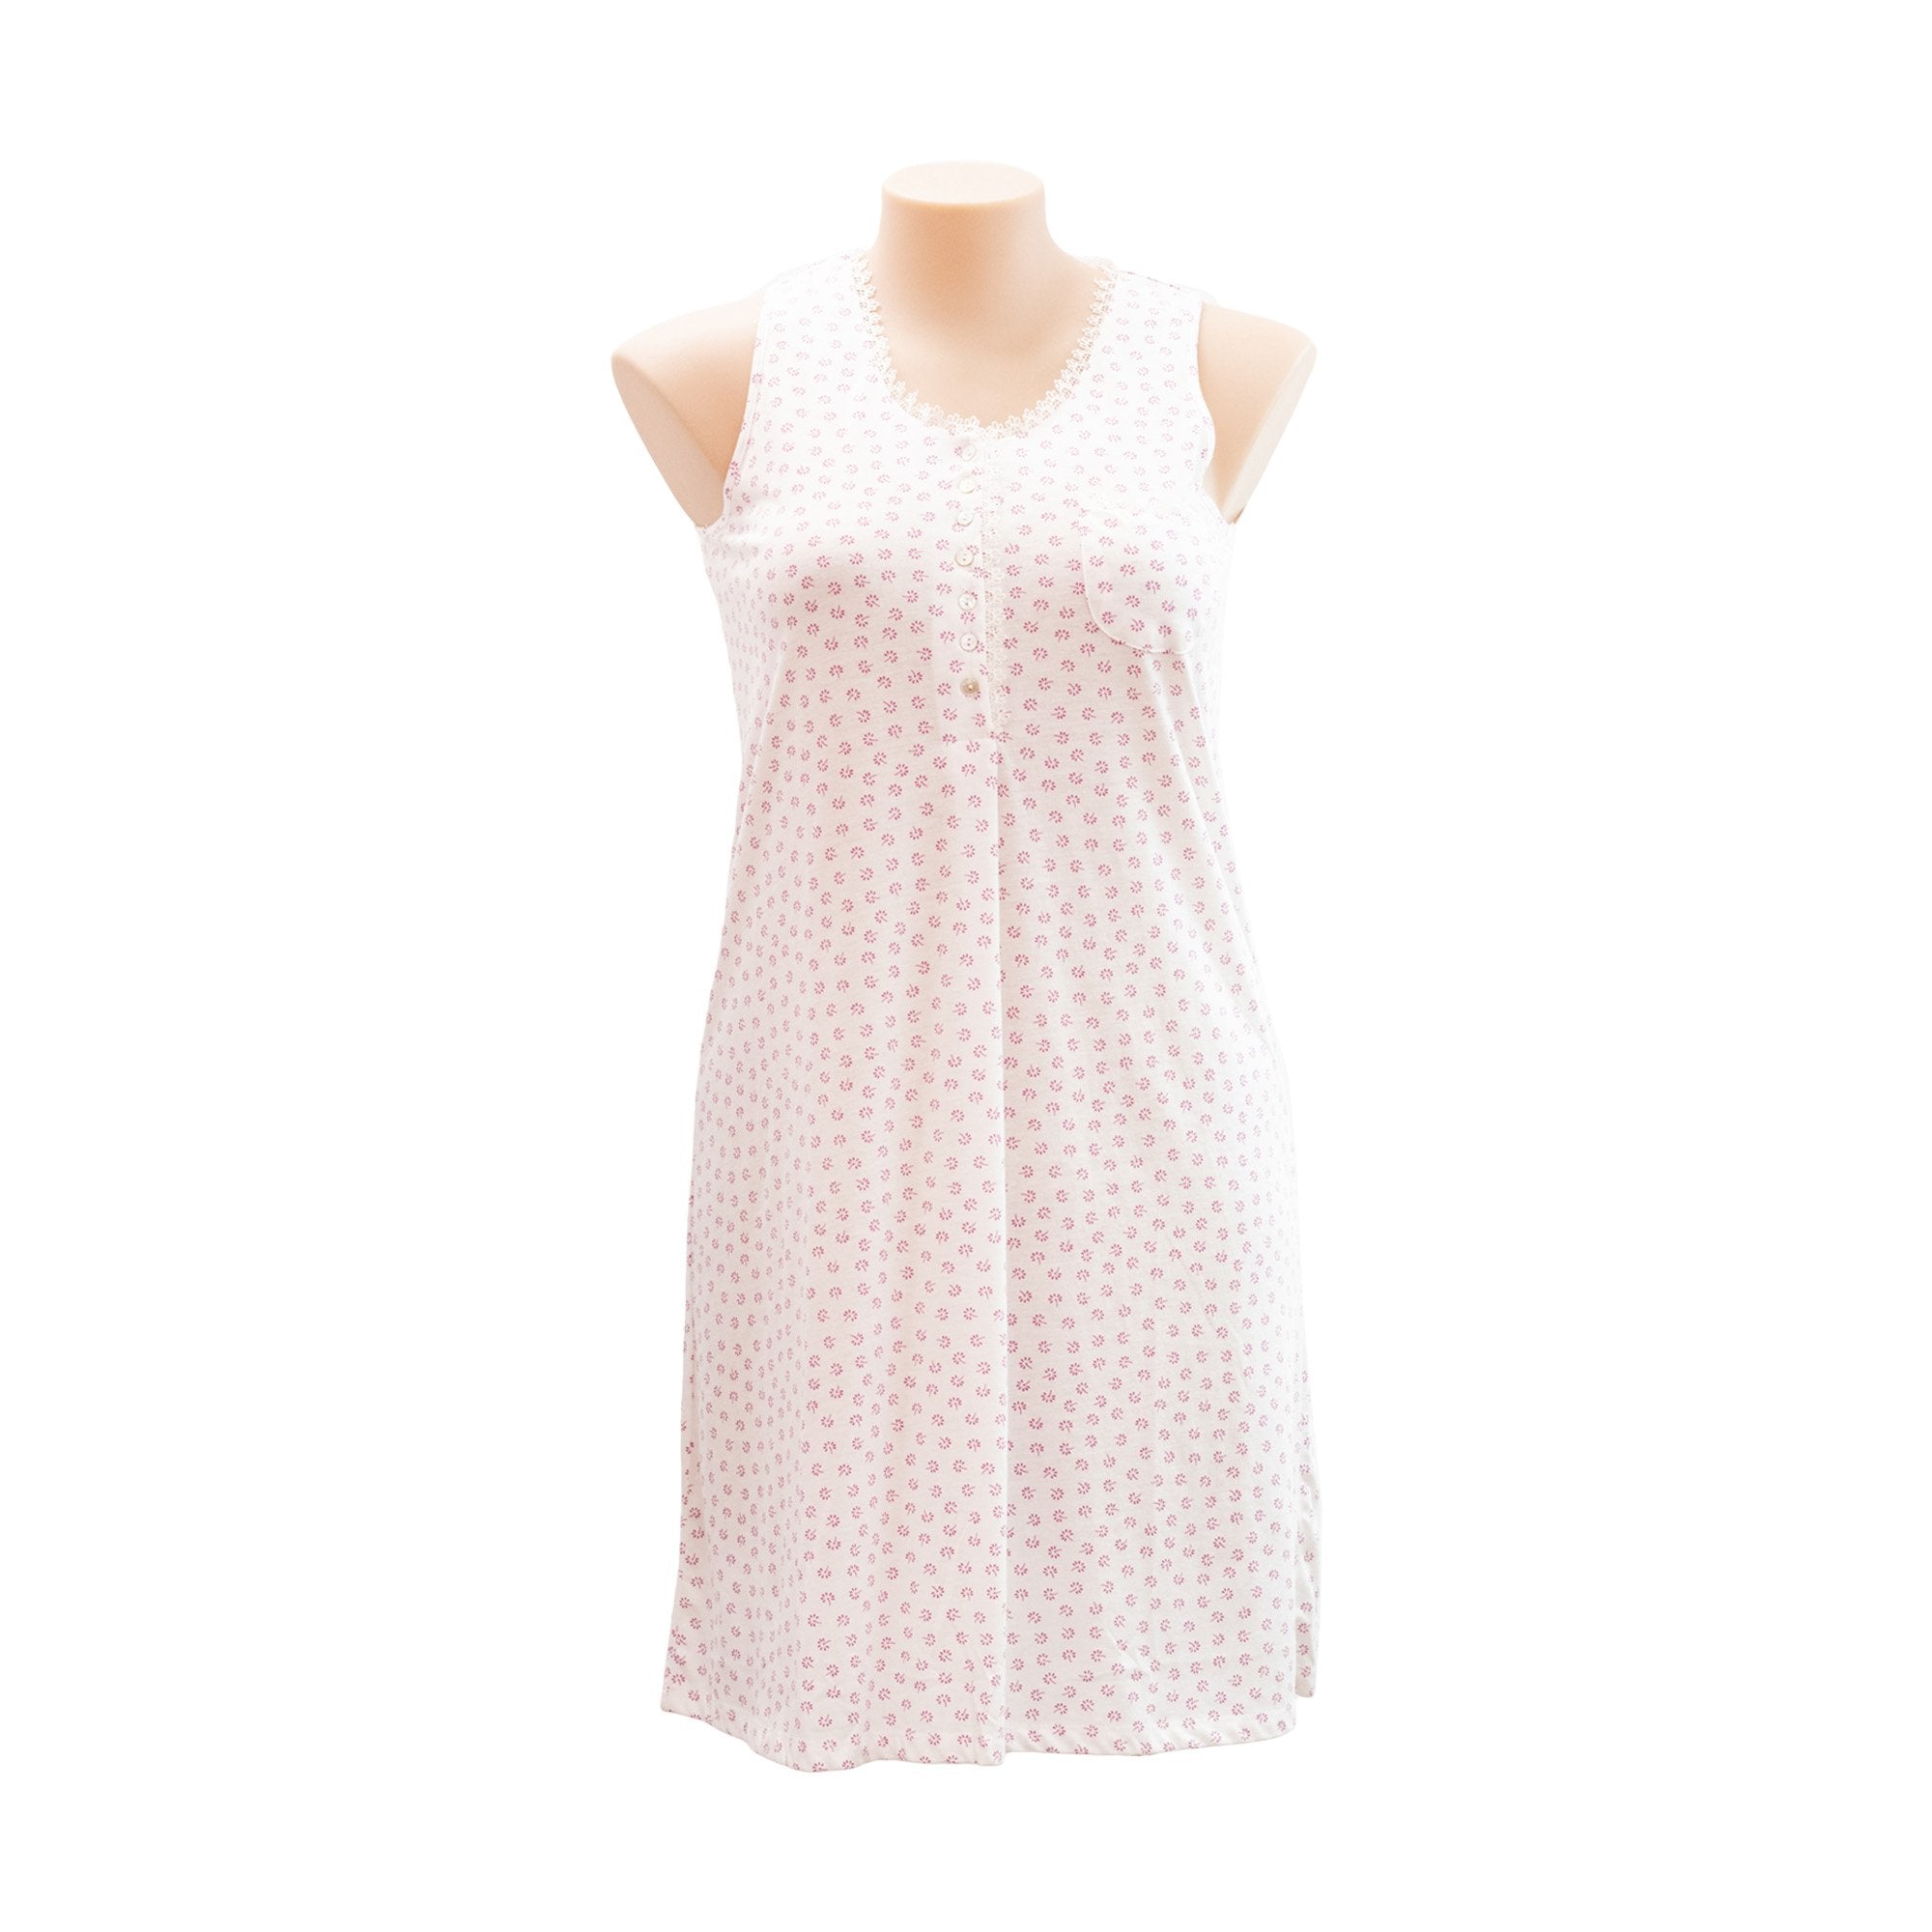 Givoni Daffodil Sleeveless SK144 - Nighties Ivory / 10  Available at Illusions Lingerie